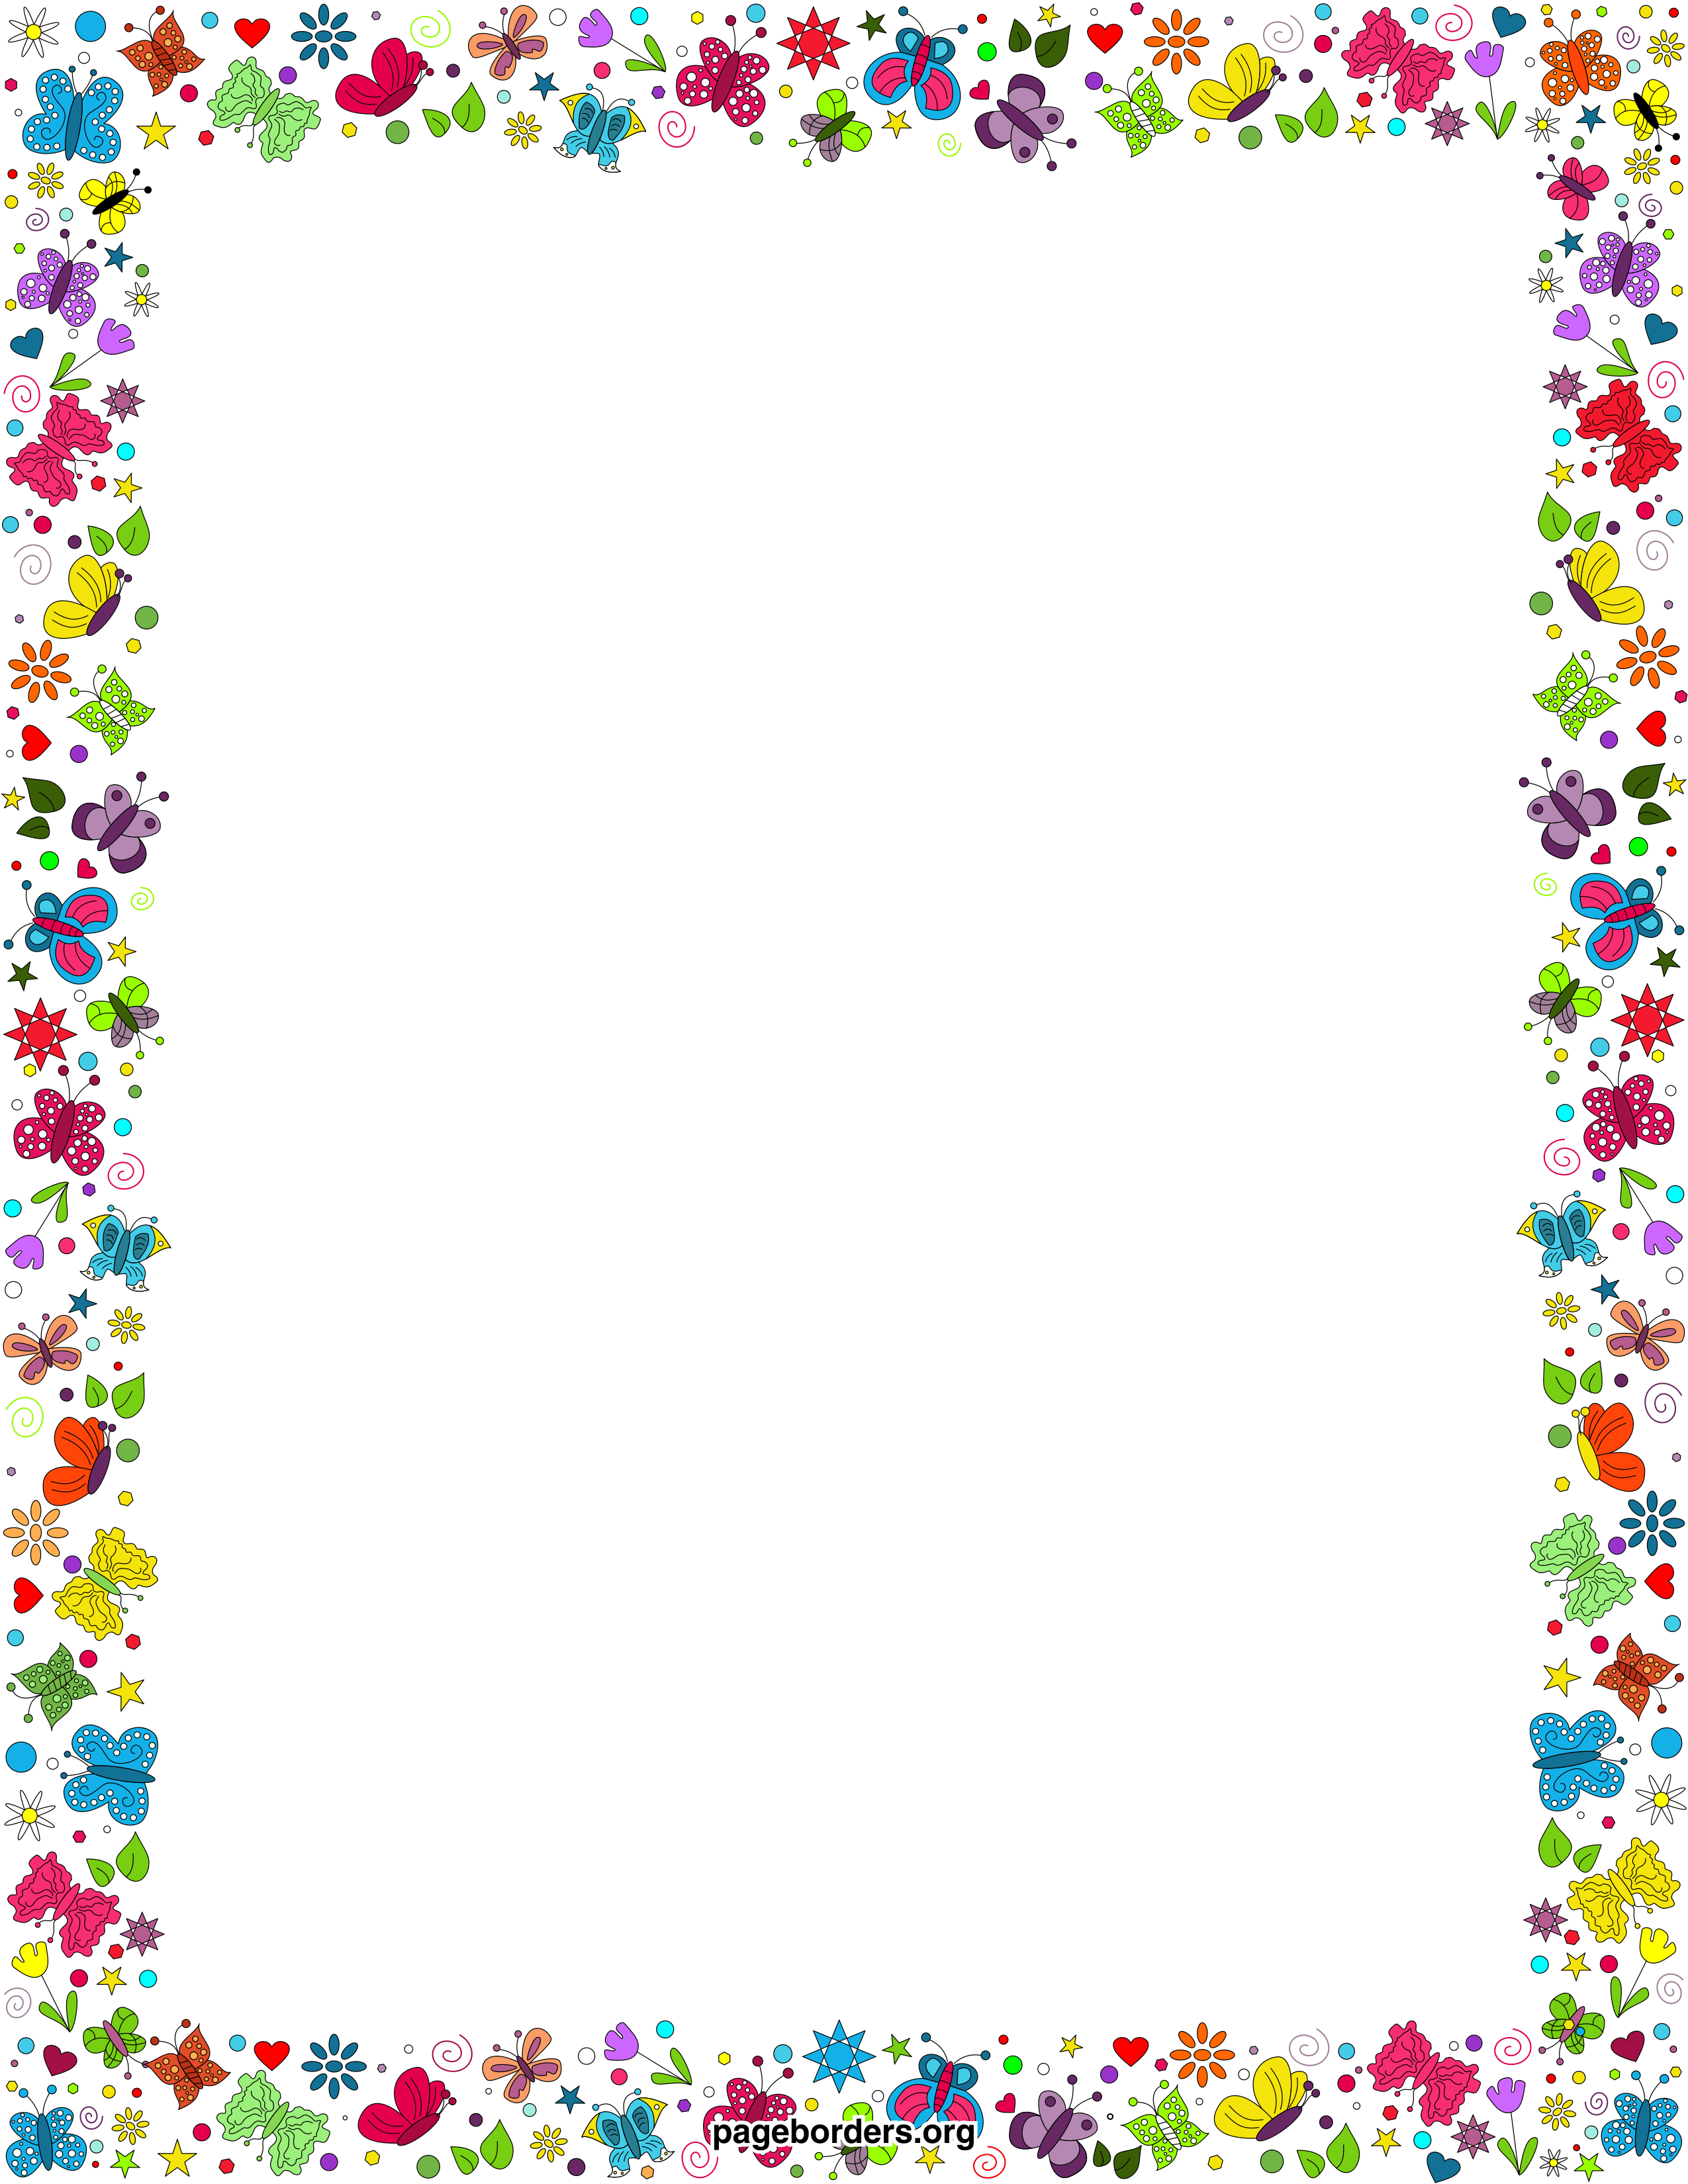 butterfly border clipart - photo #2